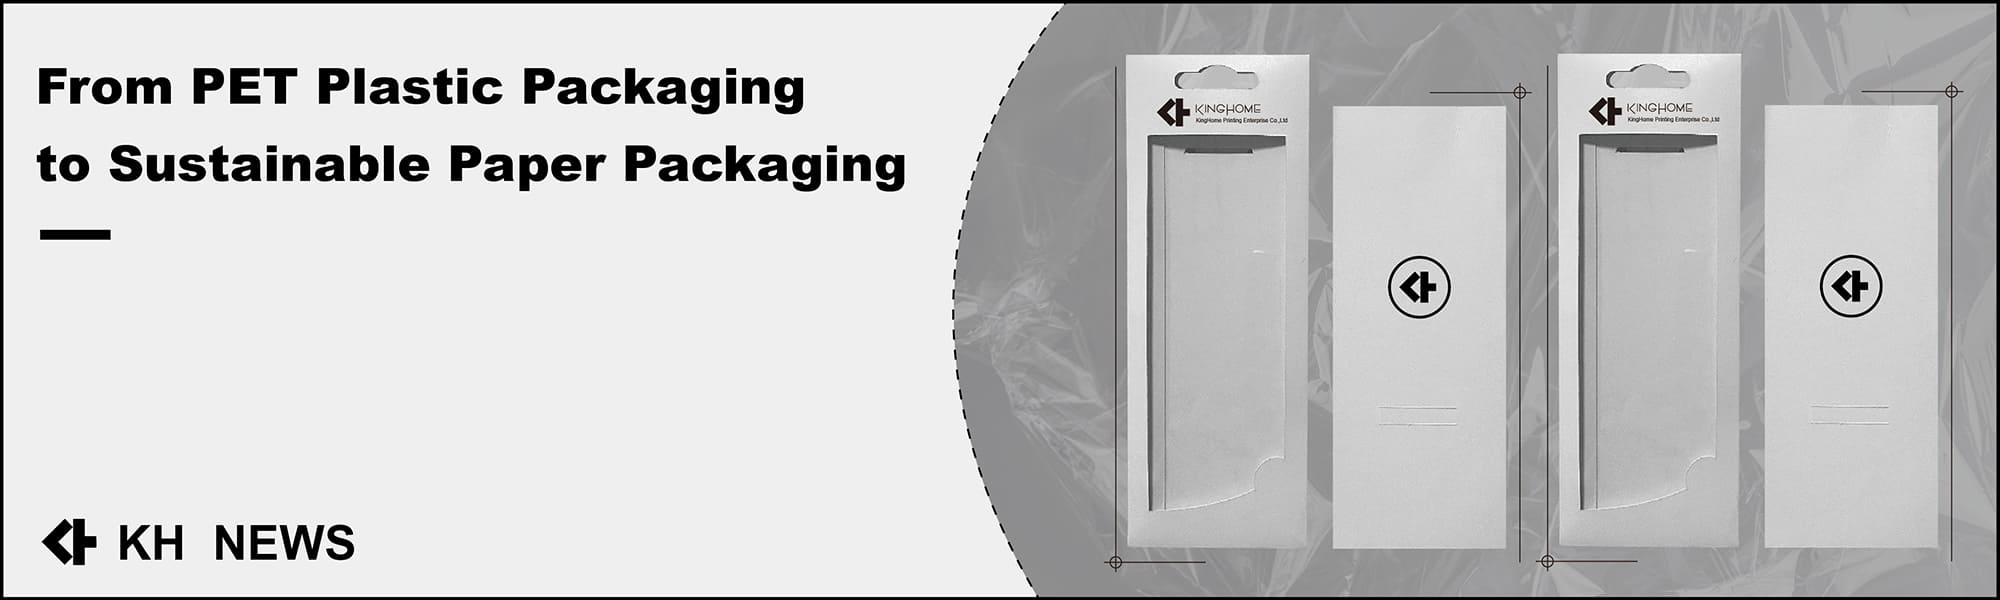 Plastic Packaging to Sustainable Packaging Materials